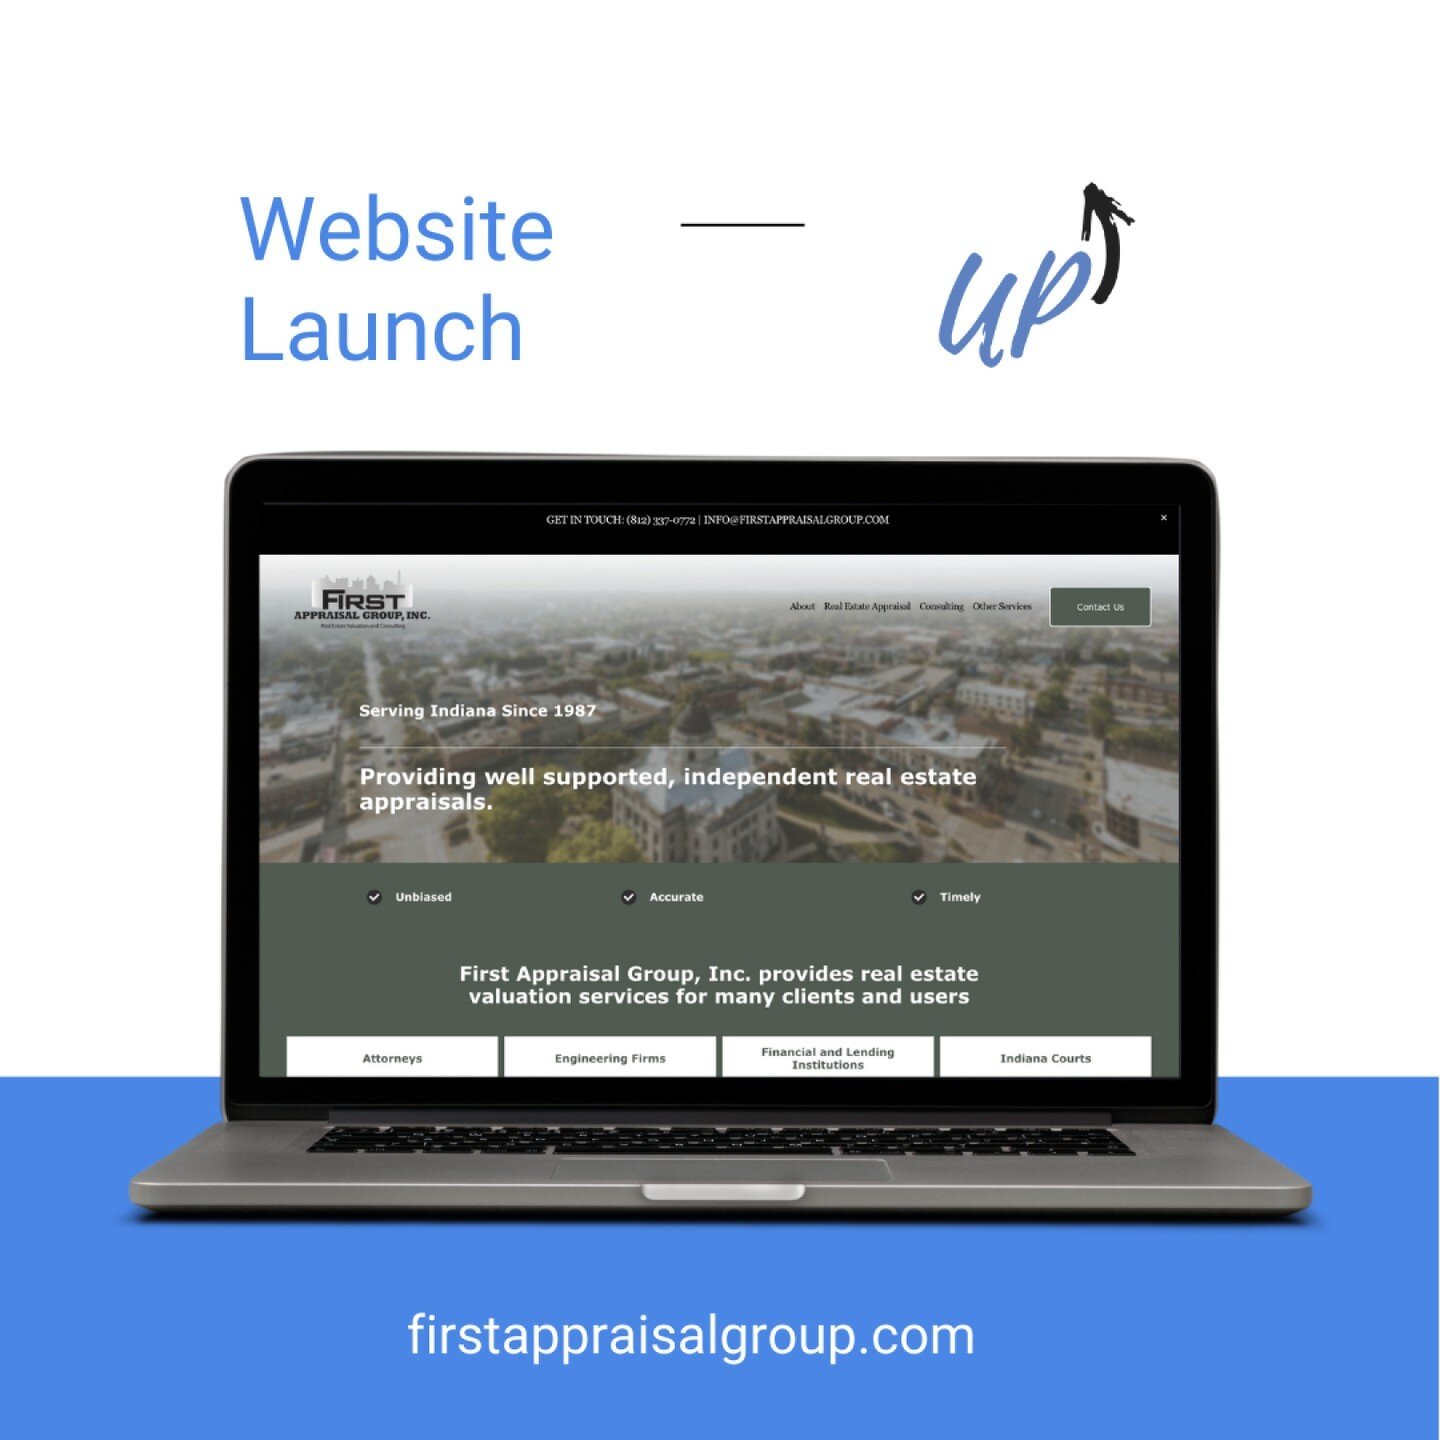 A Recent launch of a new Squarespace website for First Appraisal Group located here in Bloomington Indiana. A new website was on the list of goals for this brand in 2024 and we're happy they chose us for the job. A big thank you!
*
*
#marketingdigita